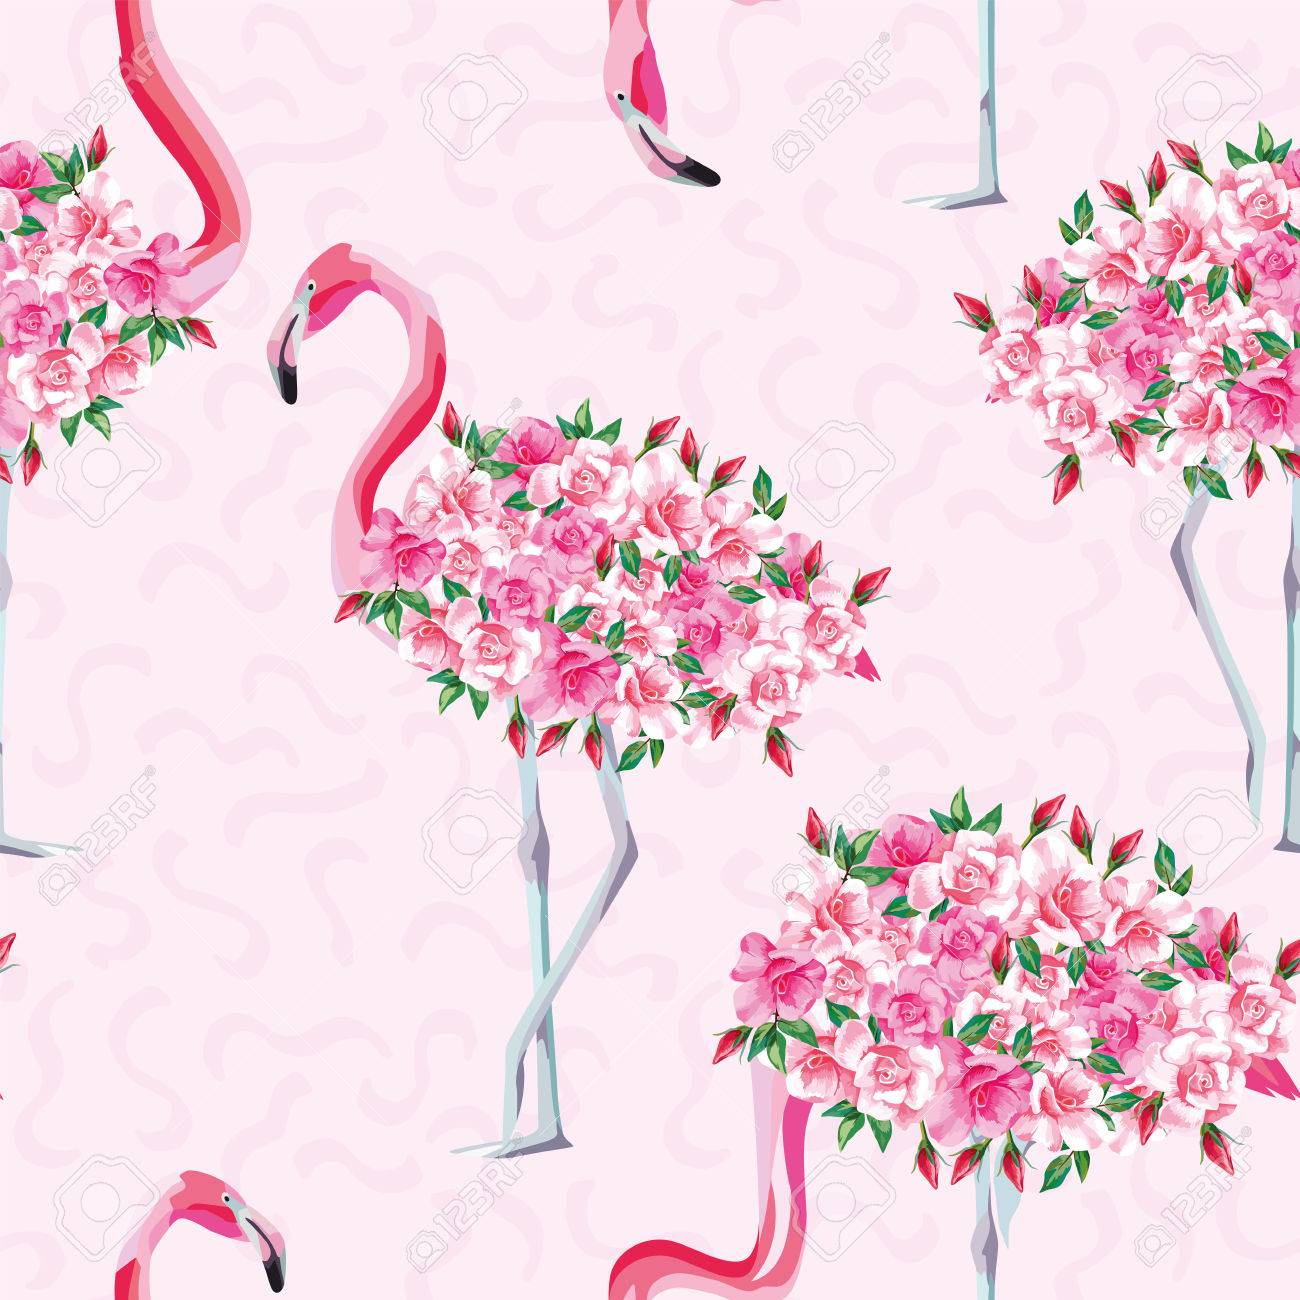 Beach Image Of A Wallpaper With Beautiful Tropic Pink Flamingo